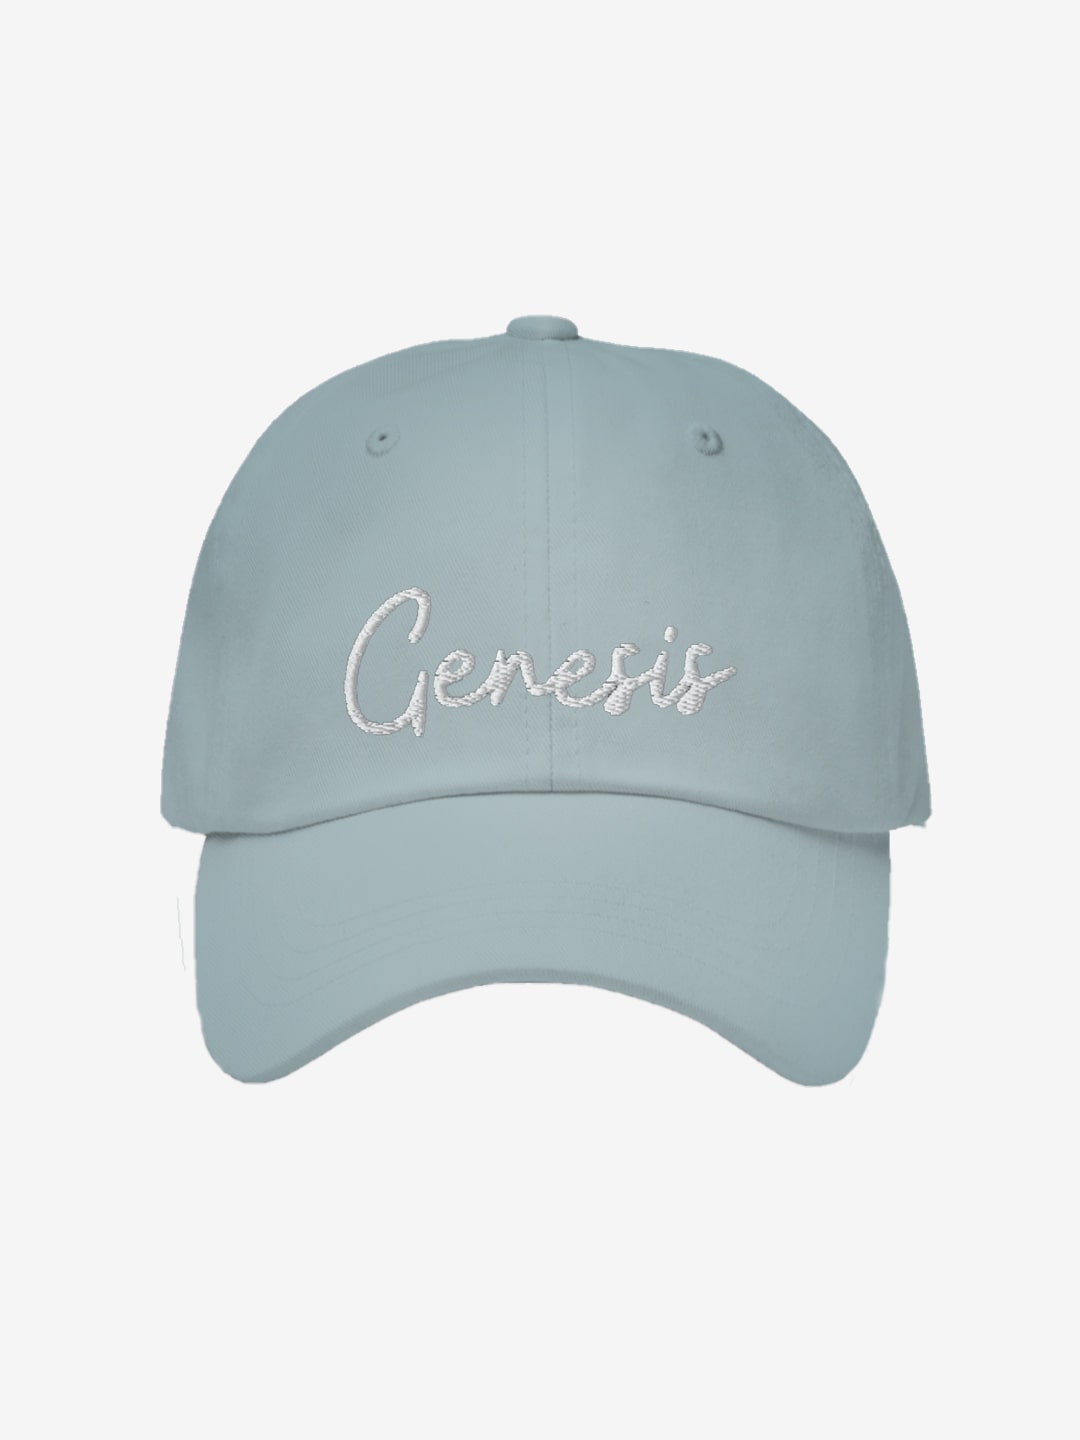 Christian Apparel Brand - Light Blue 6 Panel Hat for Women with the word "Genesis" embroidered on the front. 